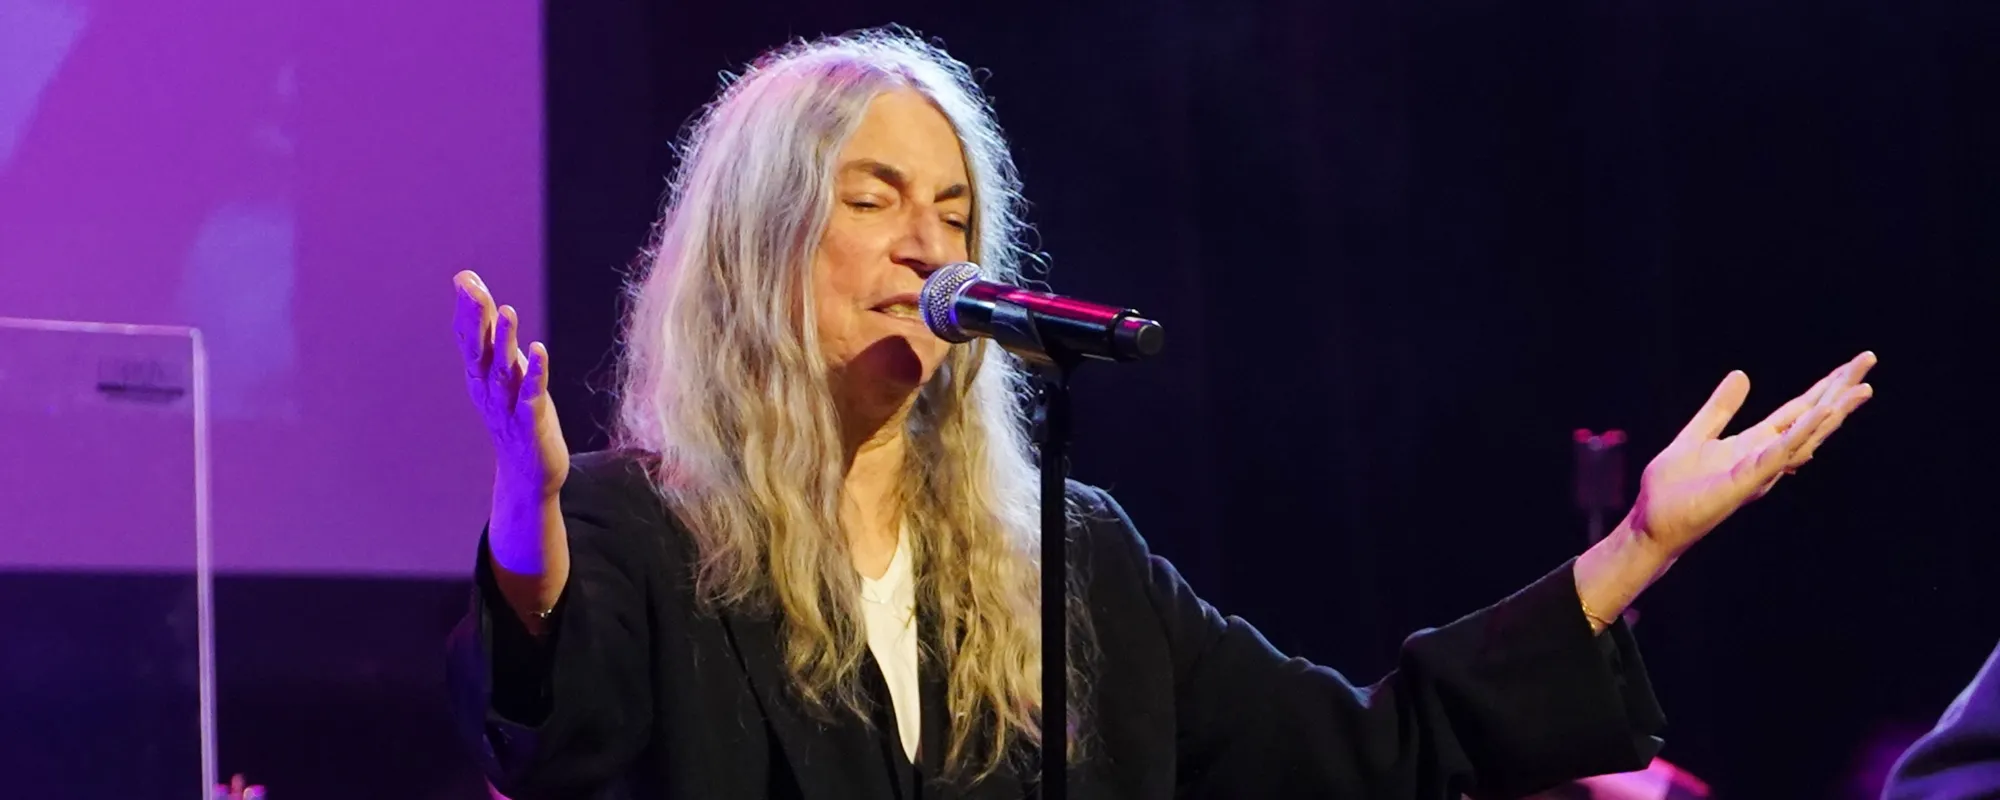 Patti Smith Opens Up About Her Extraordinary Life and Career: “I Never Planned To Be a Rock Star”